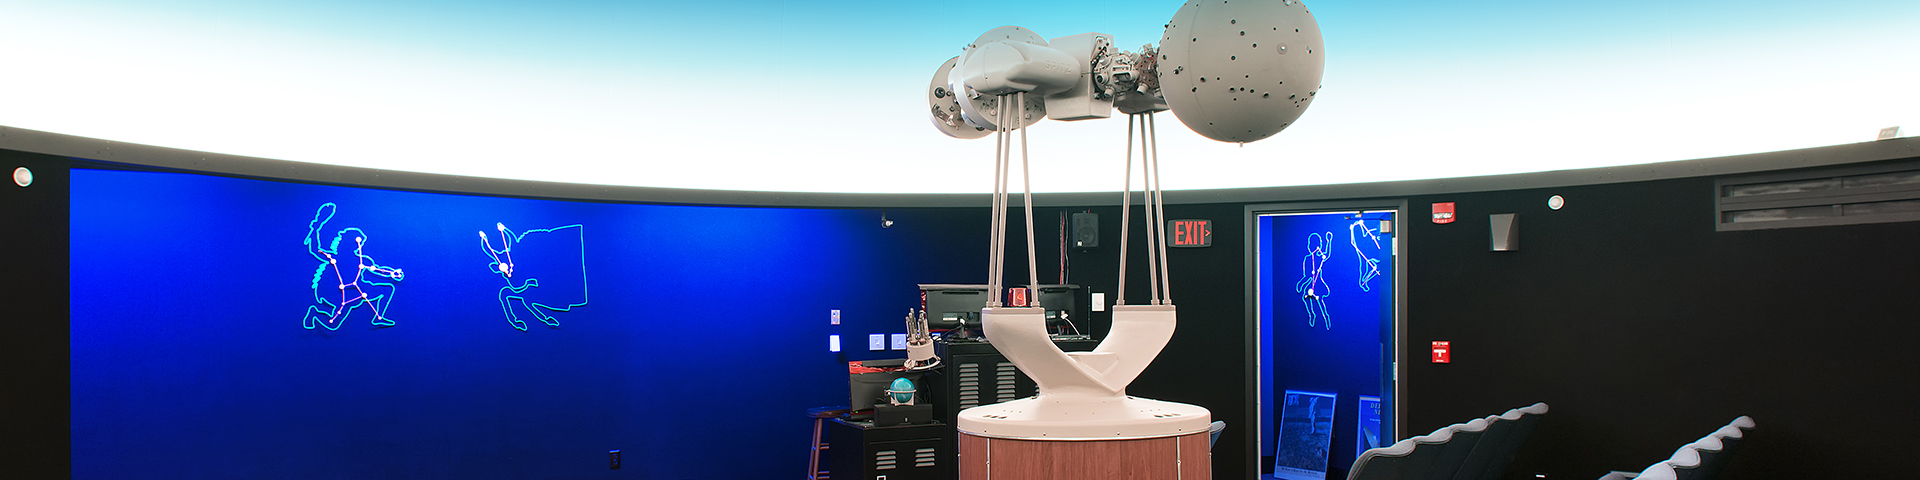 Yahn Planetarium at Penn State Behrend features a 55-seat astronomy theater, projectors, and computer equipment..